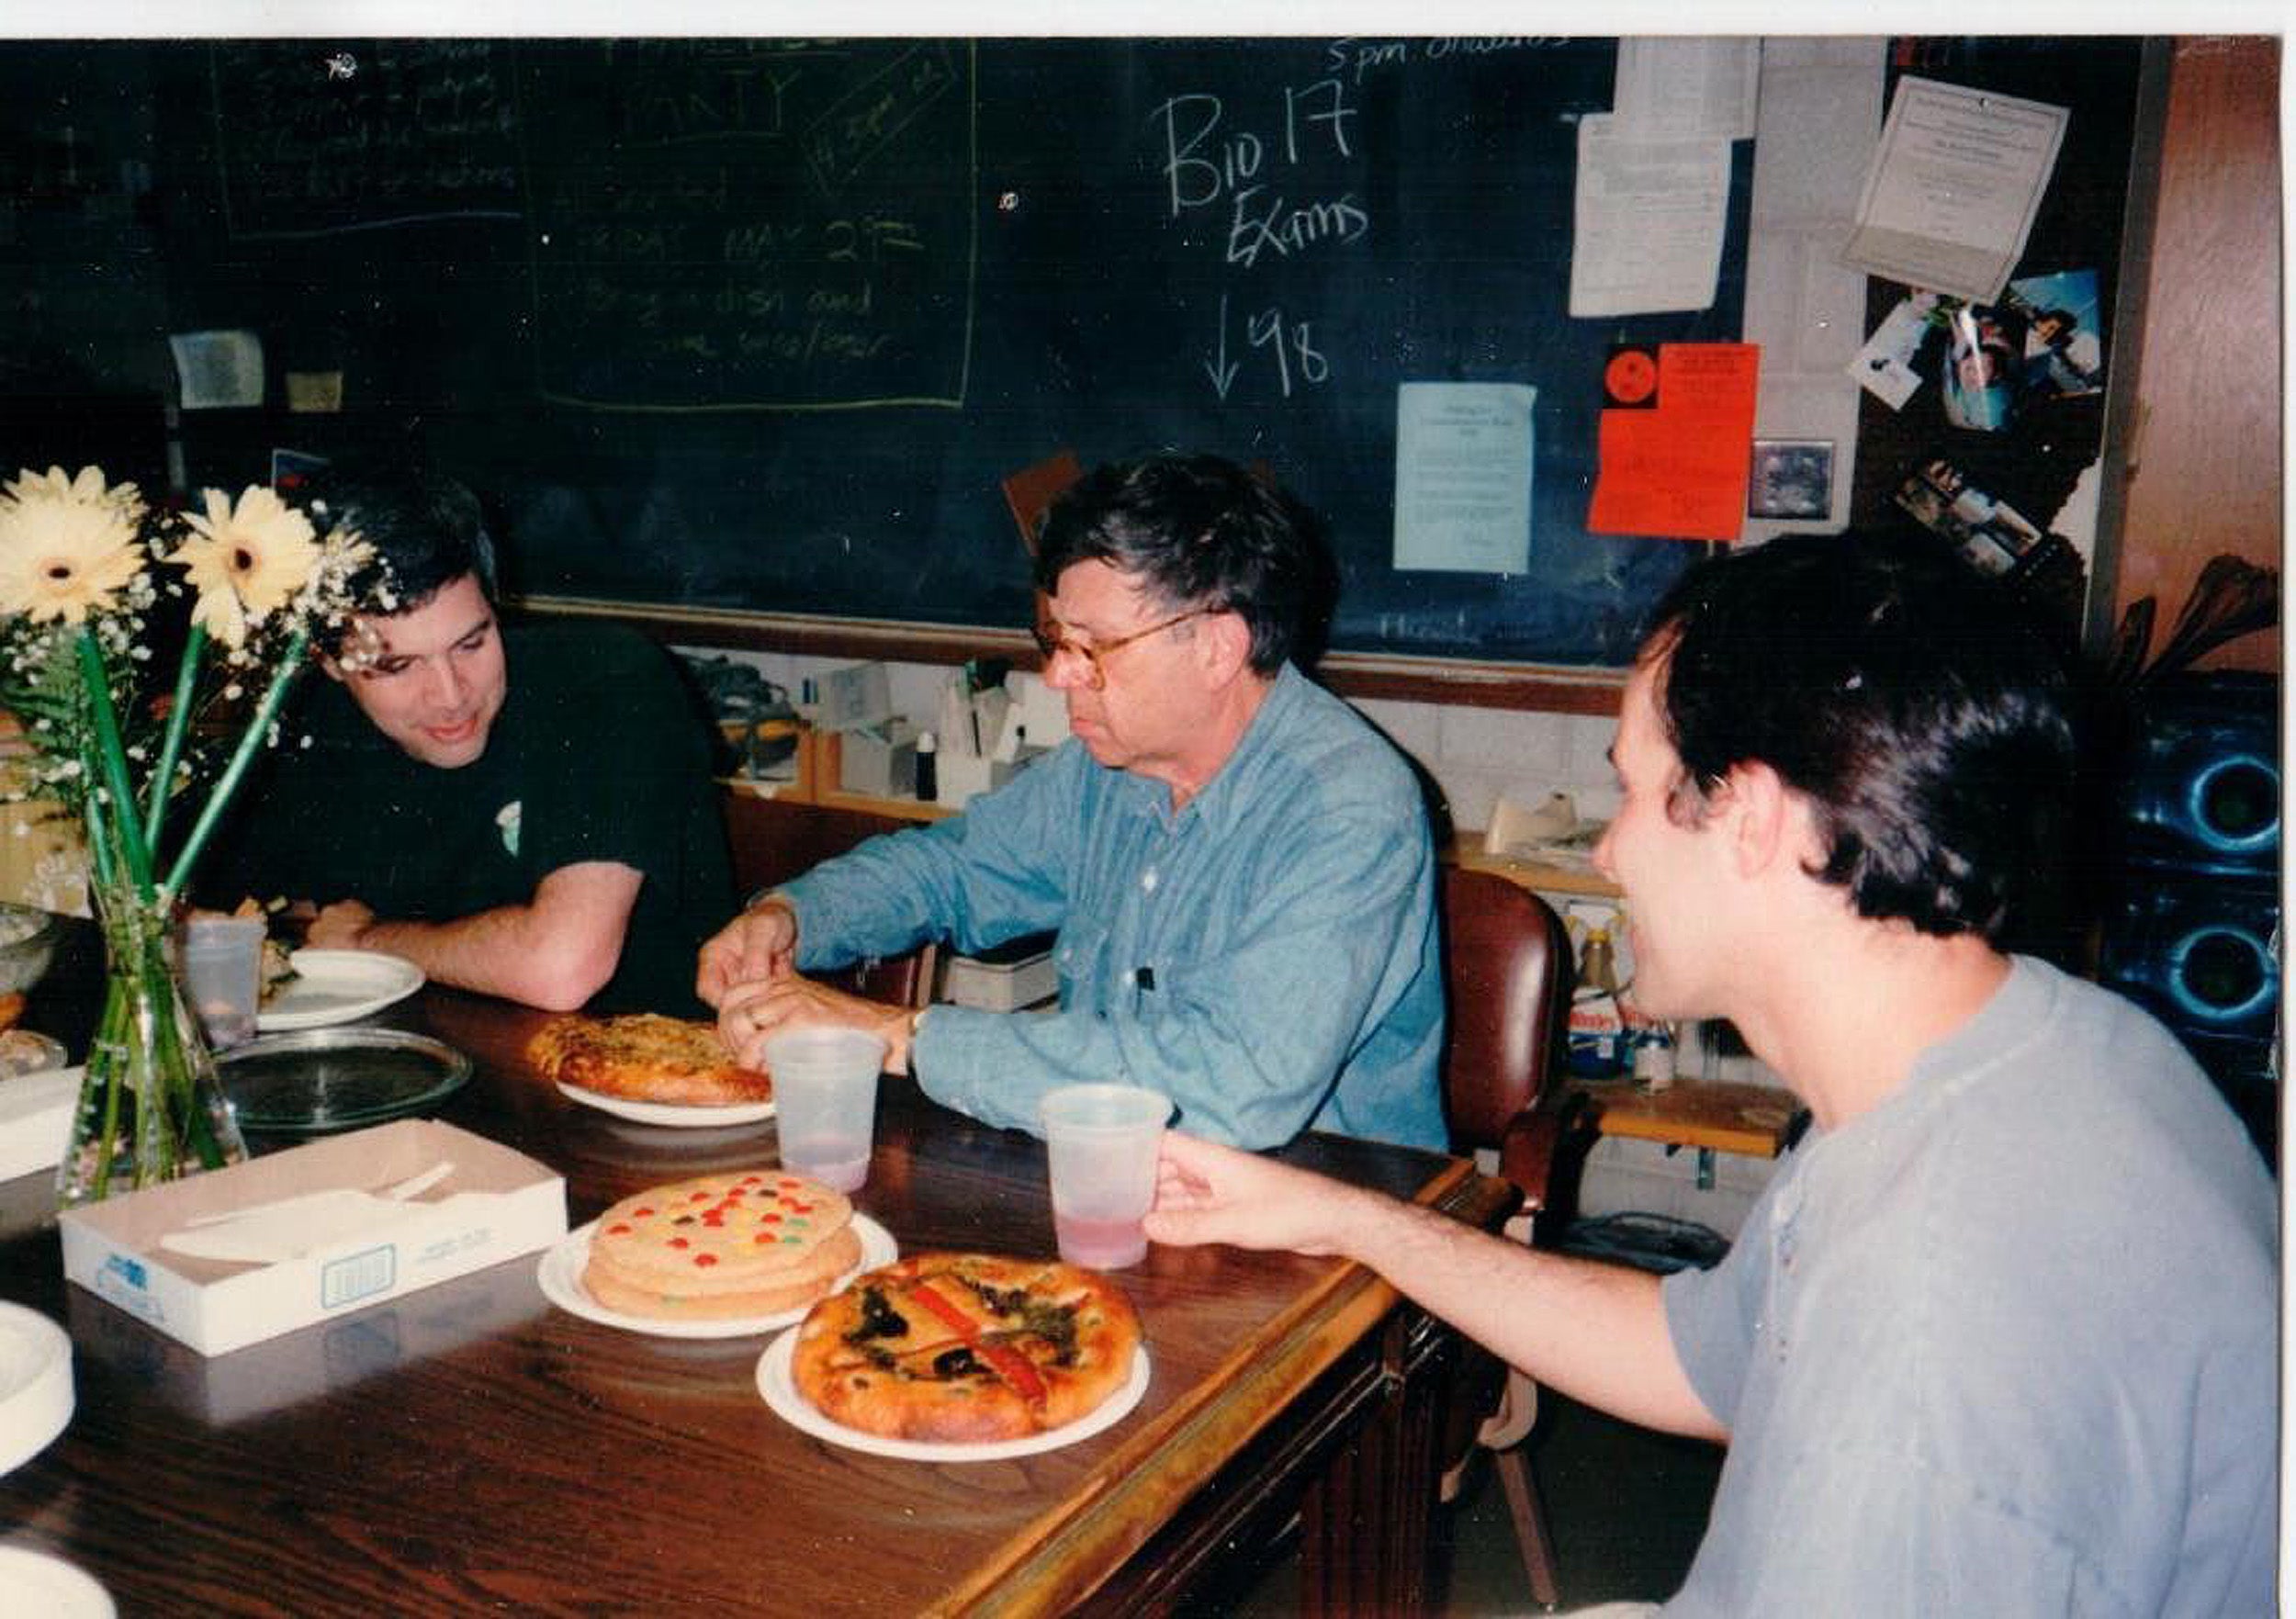 Dick Lewontin with students.